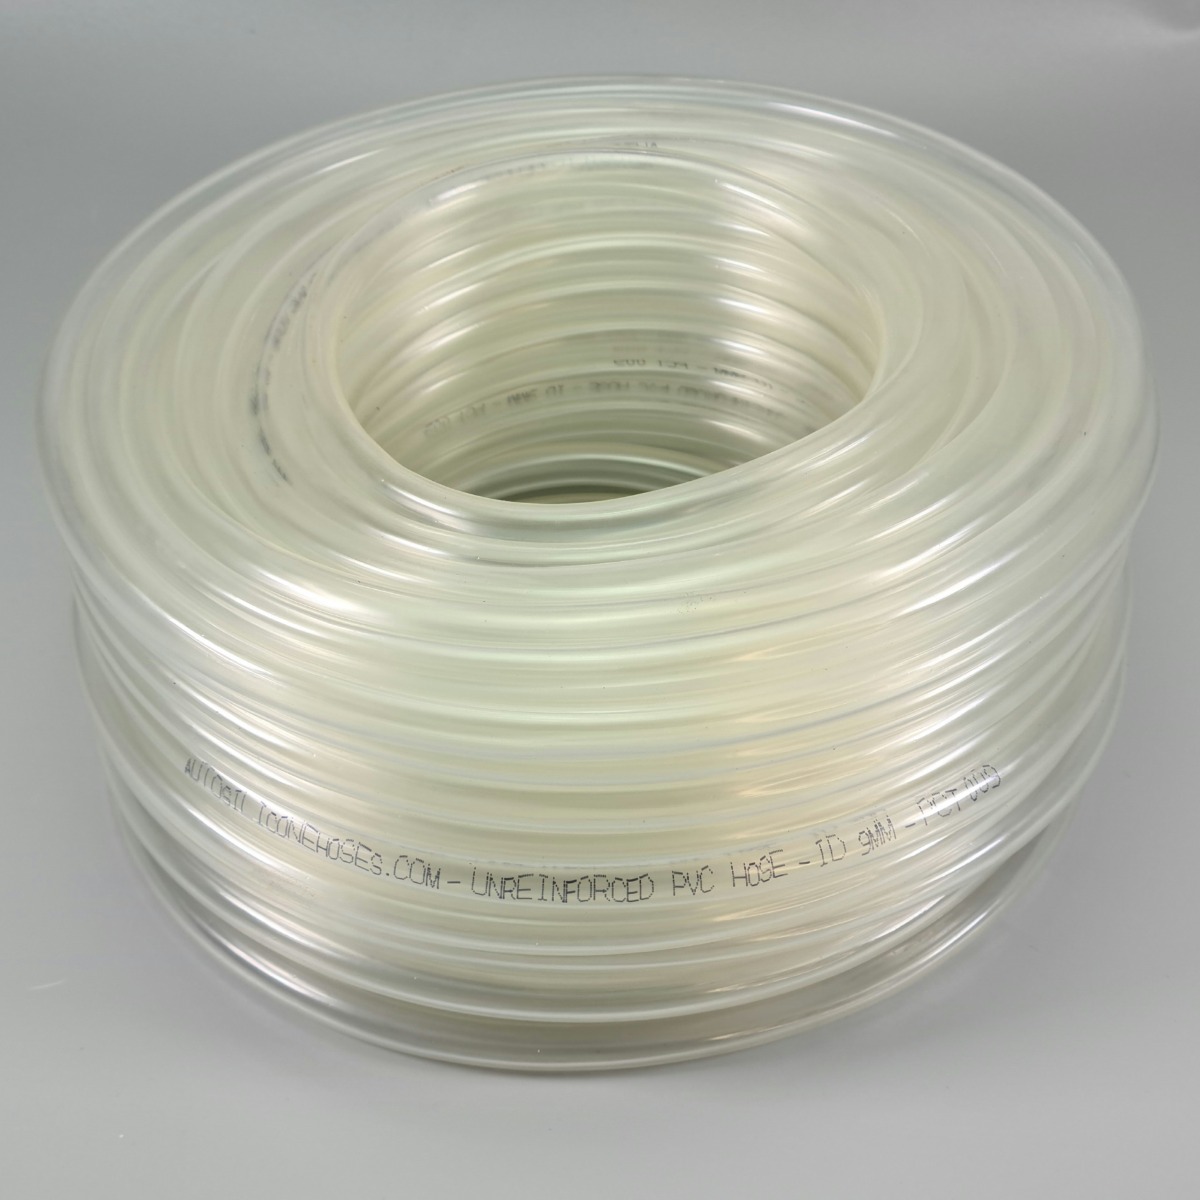 9.8 Ft Long, 10 mm Inner Dia Kesoto Clear Translucent Plastic PVC Tubing Hose Pipe for Water Air Pump 